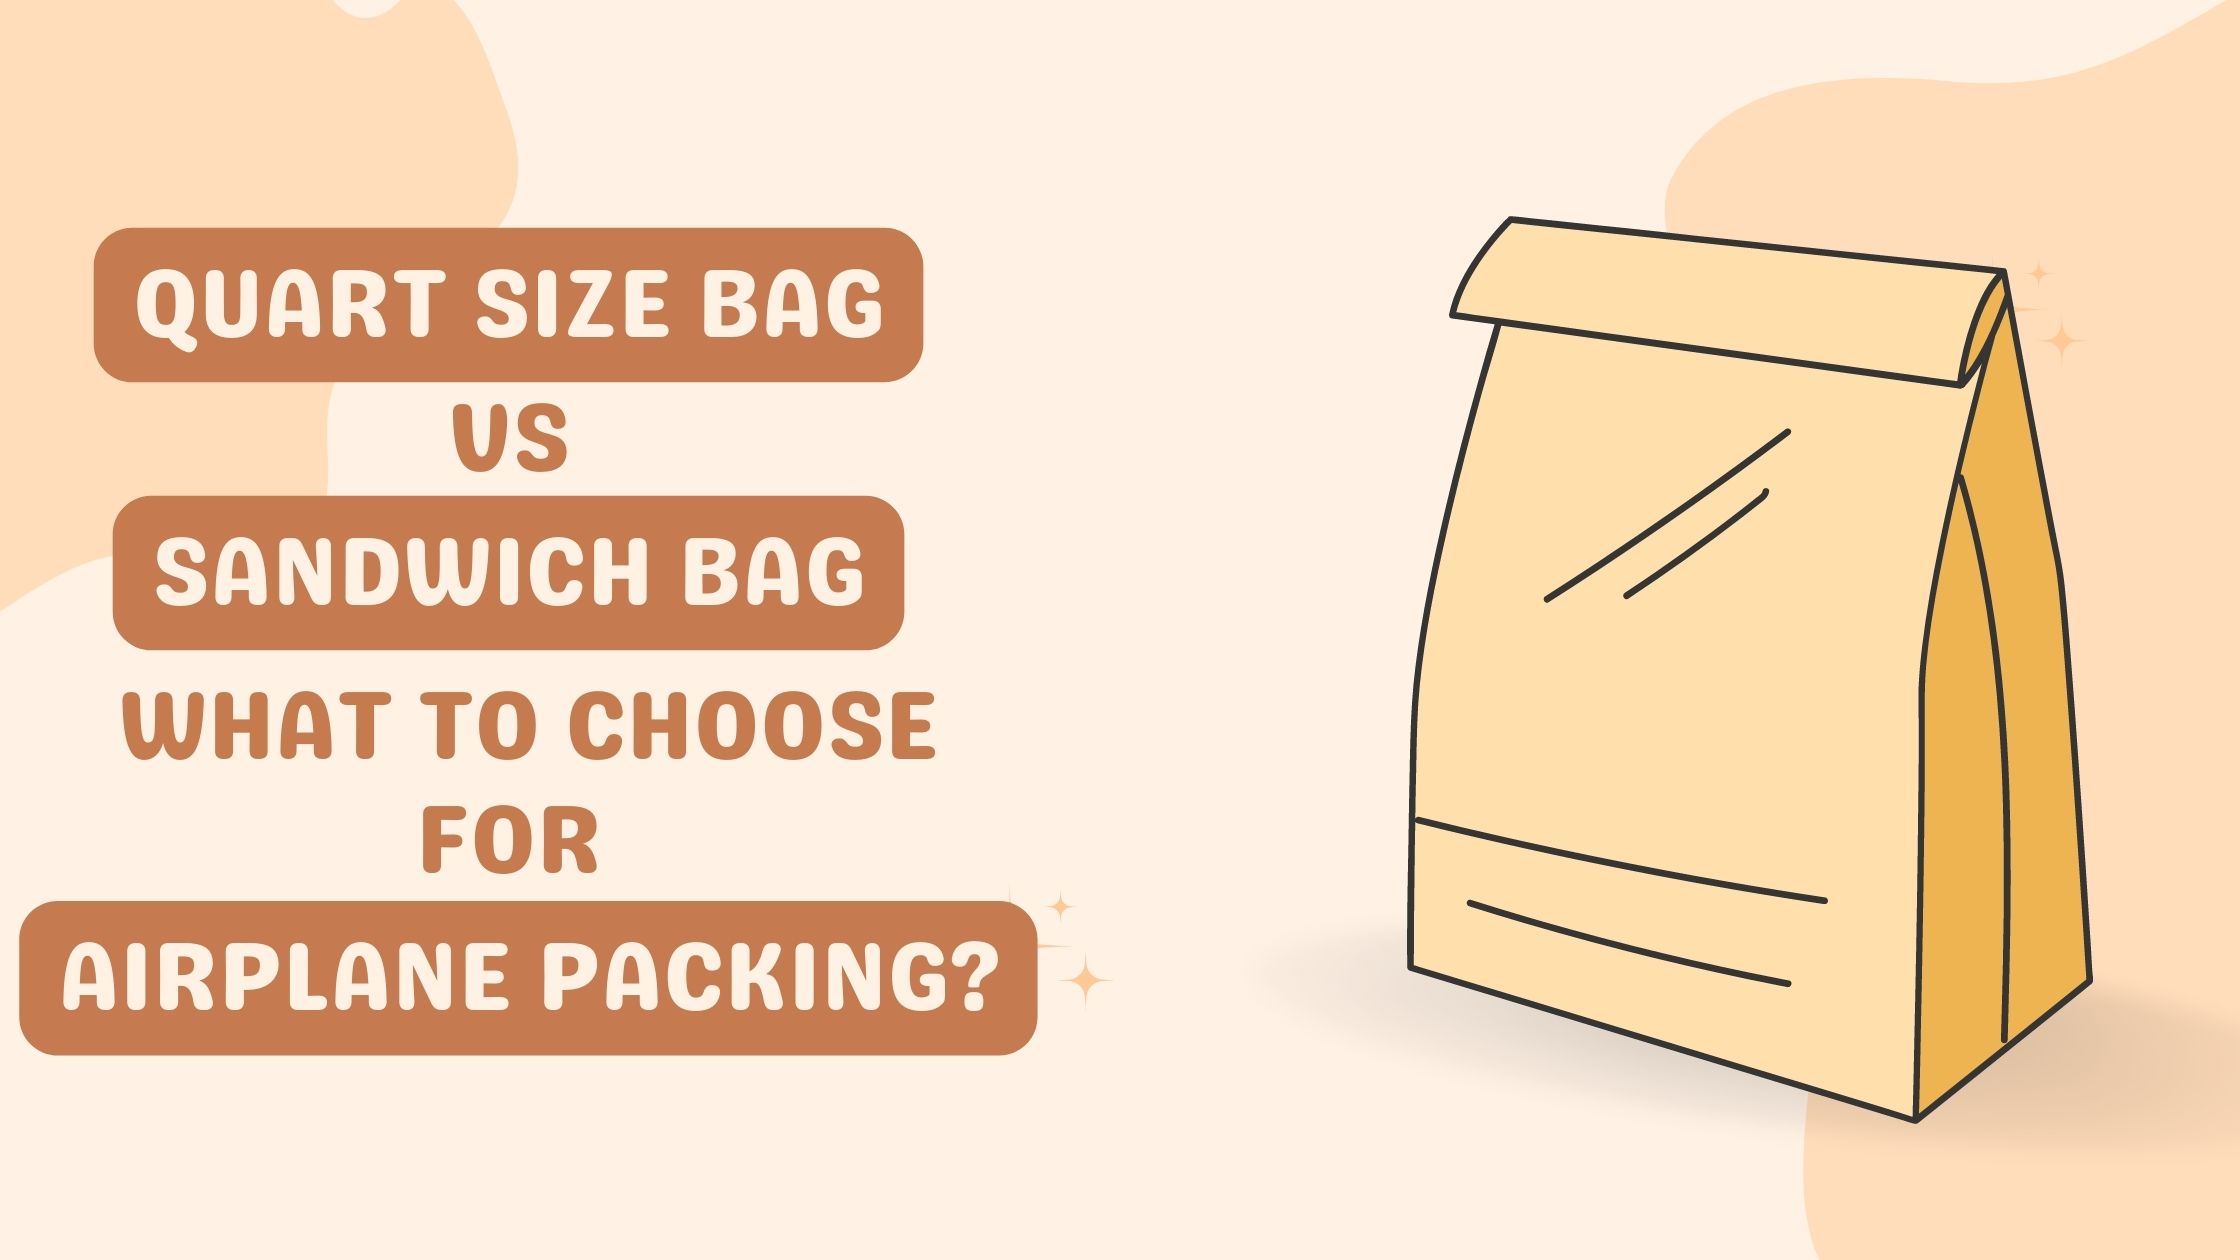 Quart Size Bag Vs Sandwich Bag - What To Choose For Airplane Packing